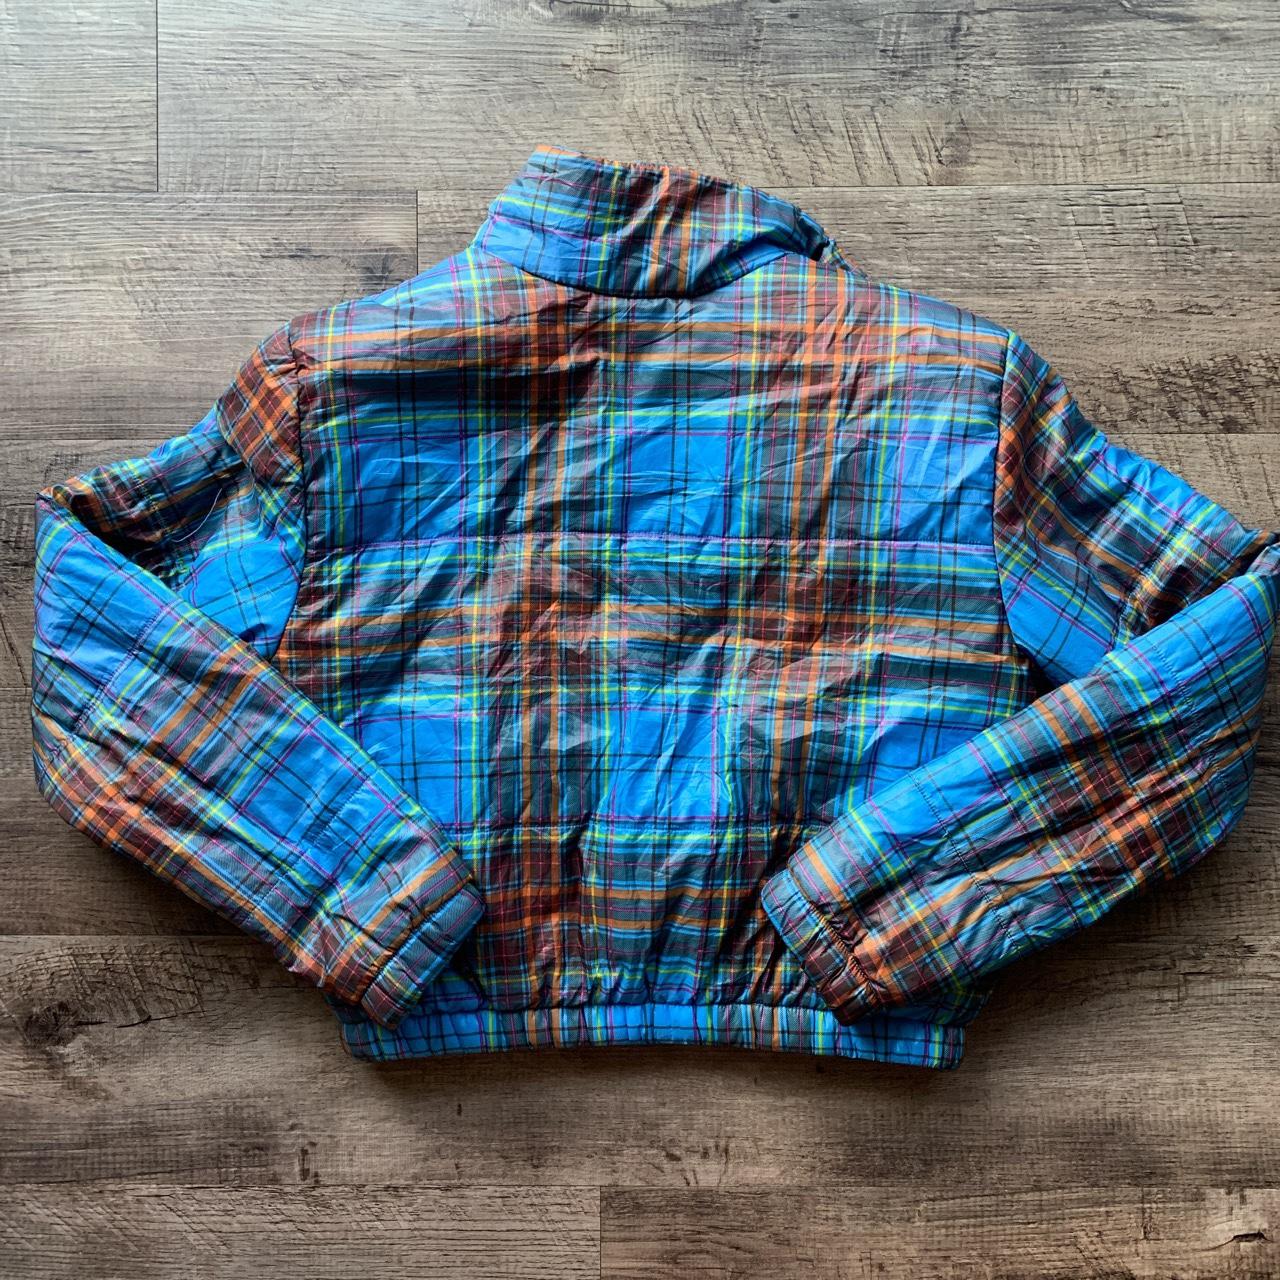 Plaid cropped jacket Wild fable brand Lightweight... - Depop